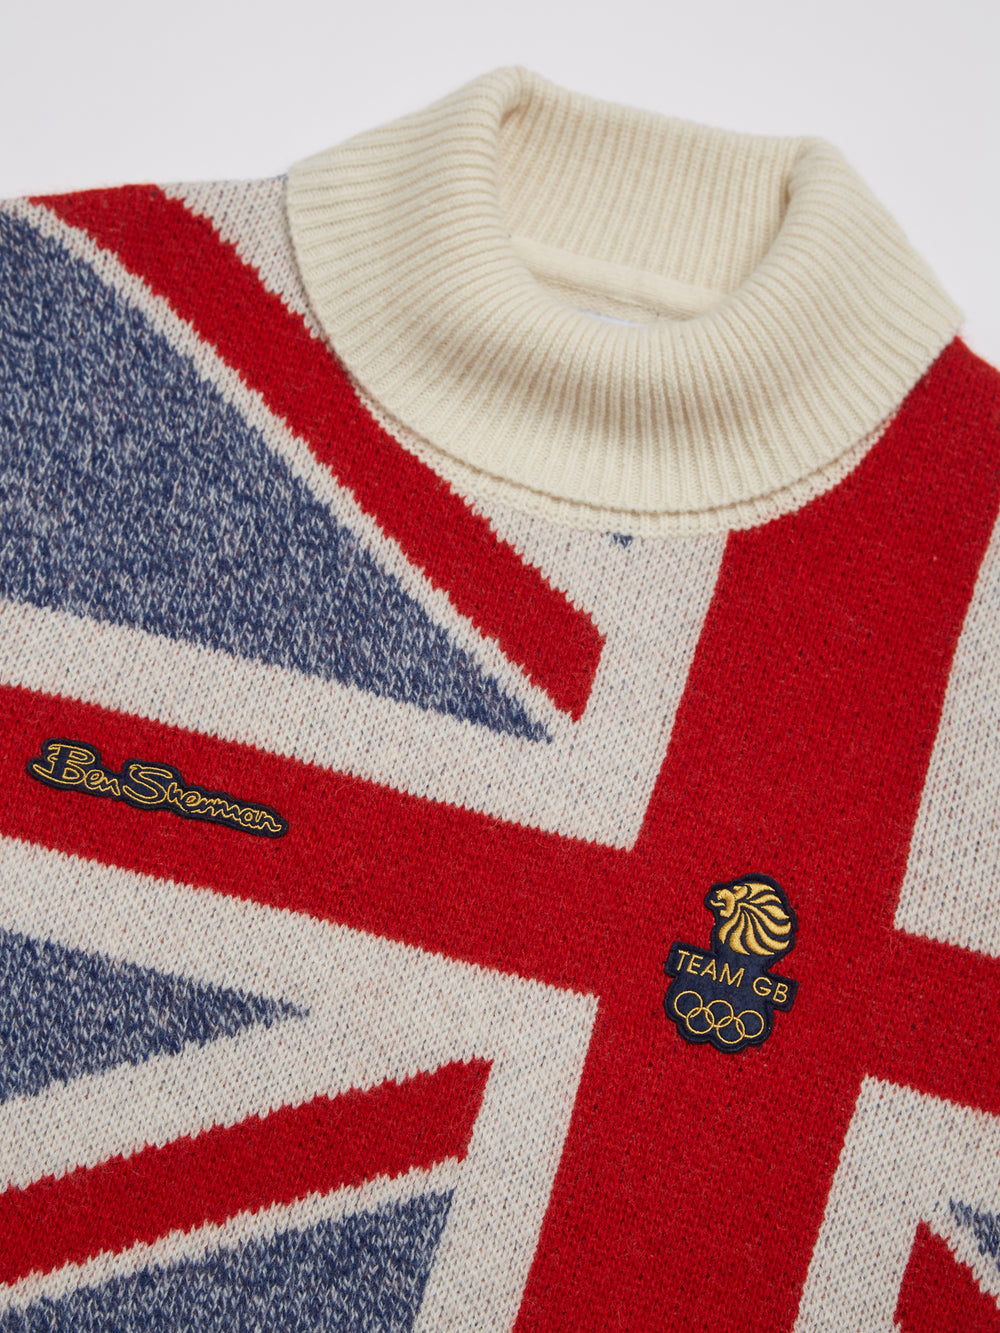 Team GB, Ben Sherman sweater, knitwear, Official 2022 Winter Olympics, Limited Edition Great Britain sweater, Beijing, GB flag, cream, roll neck